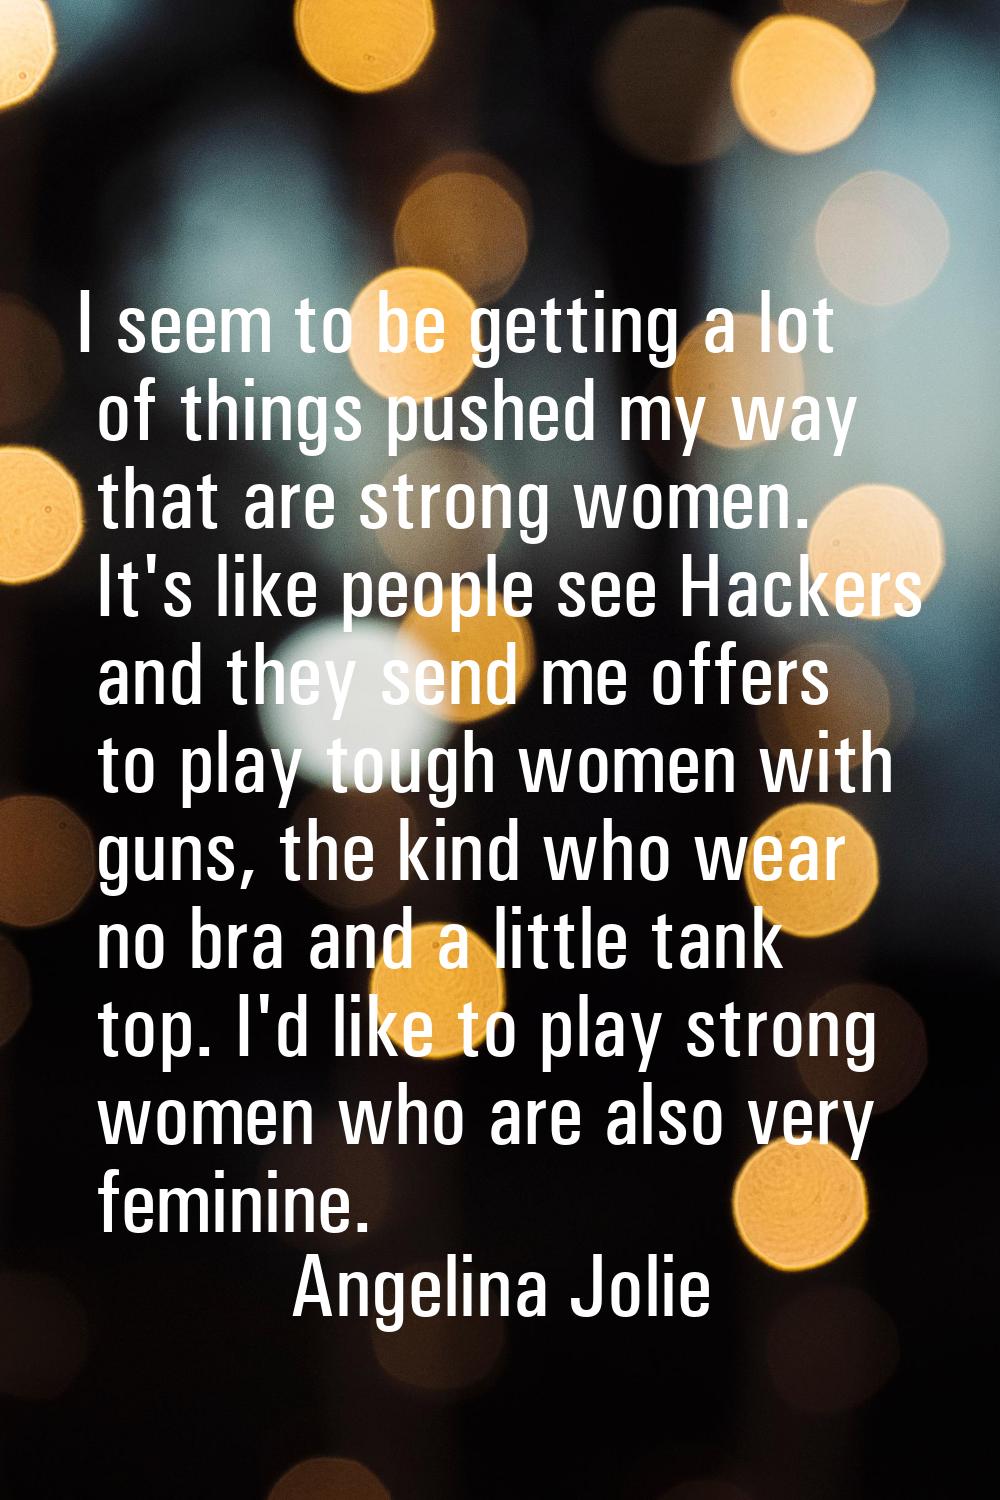 I seem to be getting a lot of things pushed my way that are strong women. It's like people see Hack